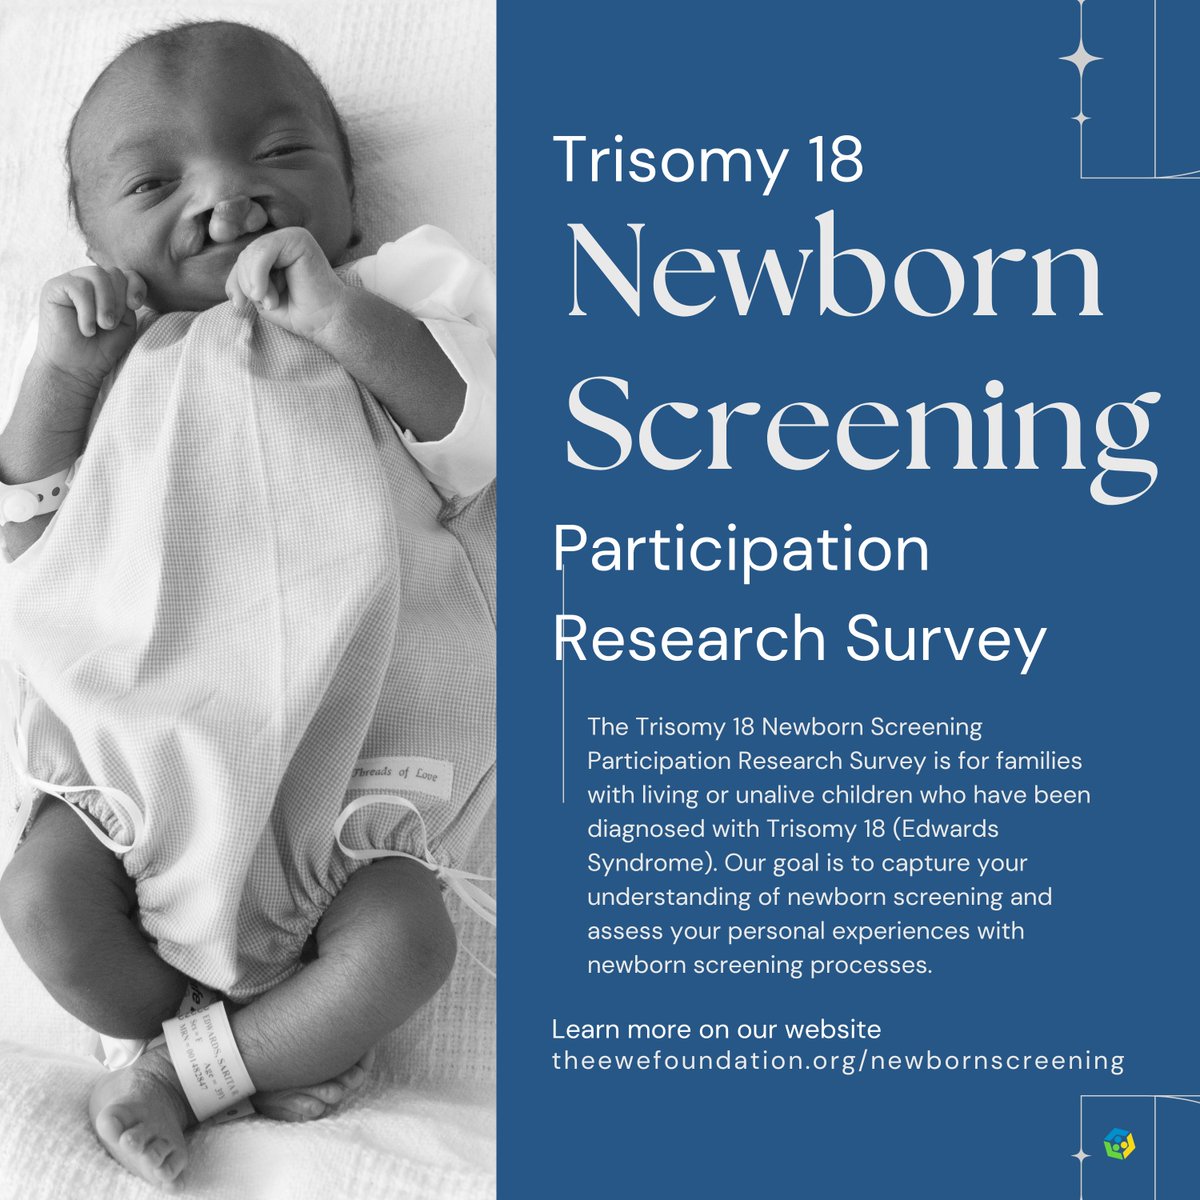 Our Trisomy 18 Newborn Screening Participation Research Survey is for families with living or unalive children who have been diagnosed with Trisomy 18 (Edwards Syndrome). Our goal is to capture your understanding of newborn screening. Complete the survey - buff.ly/3vk6ZMW